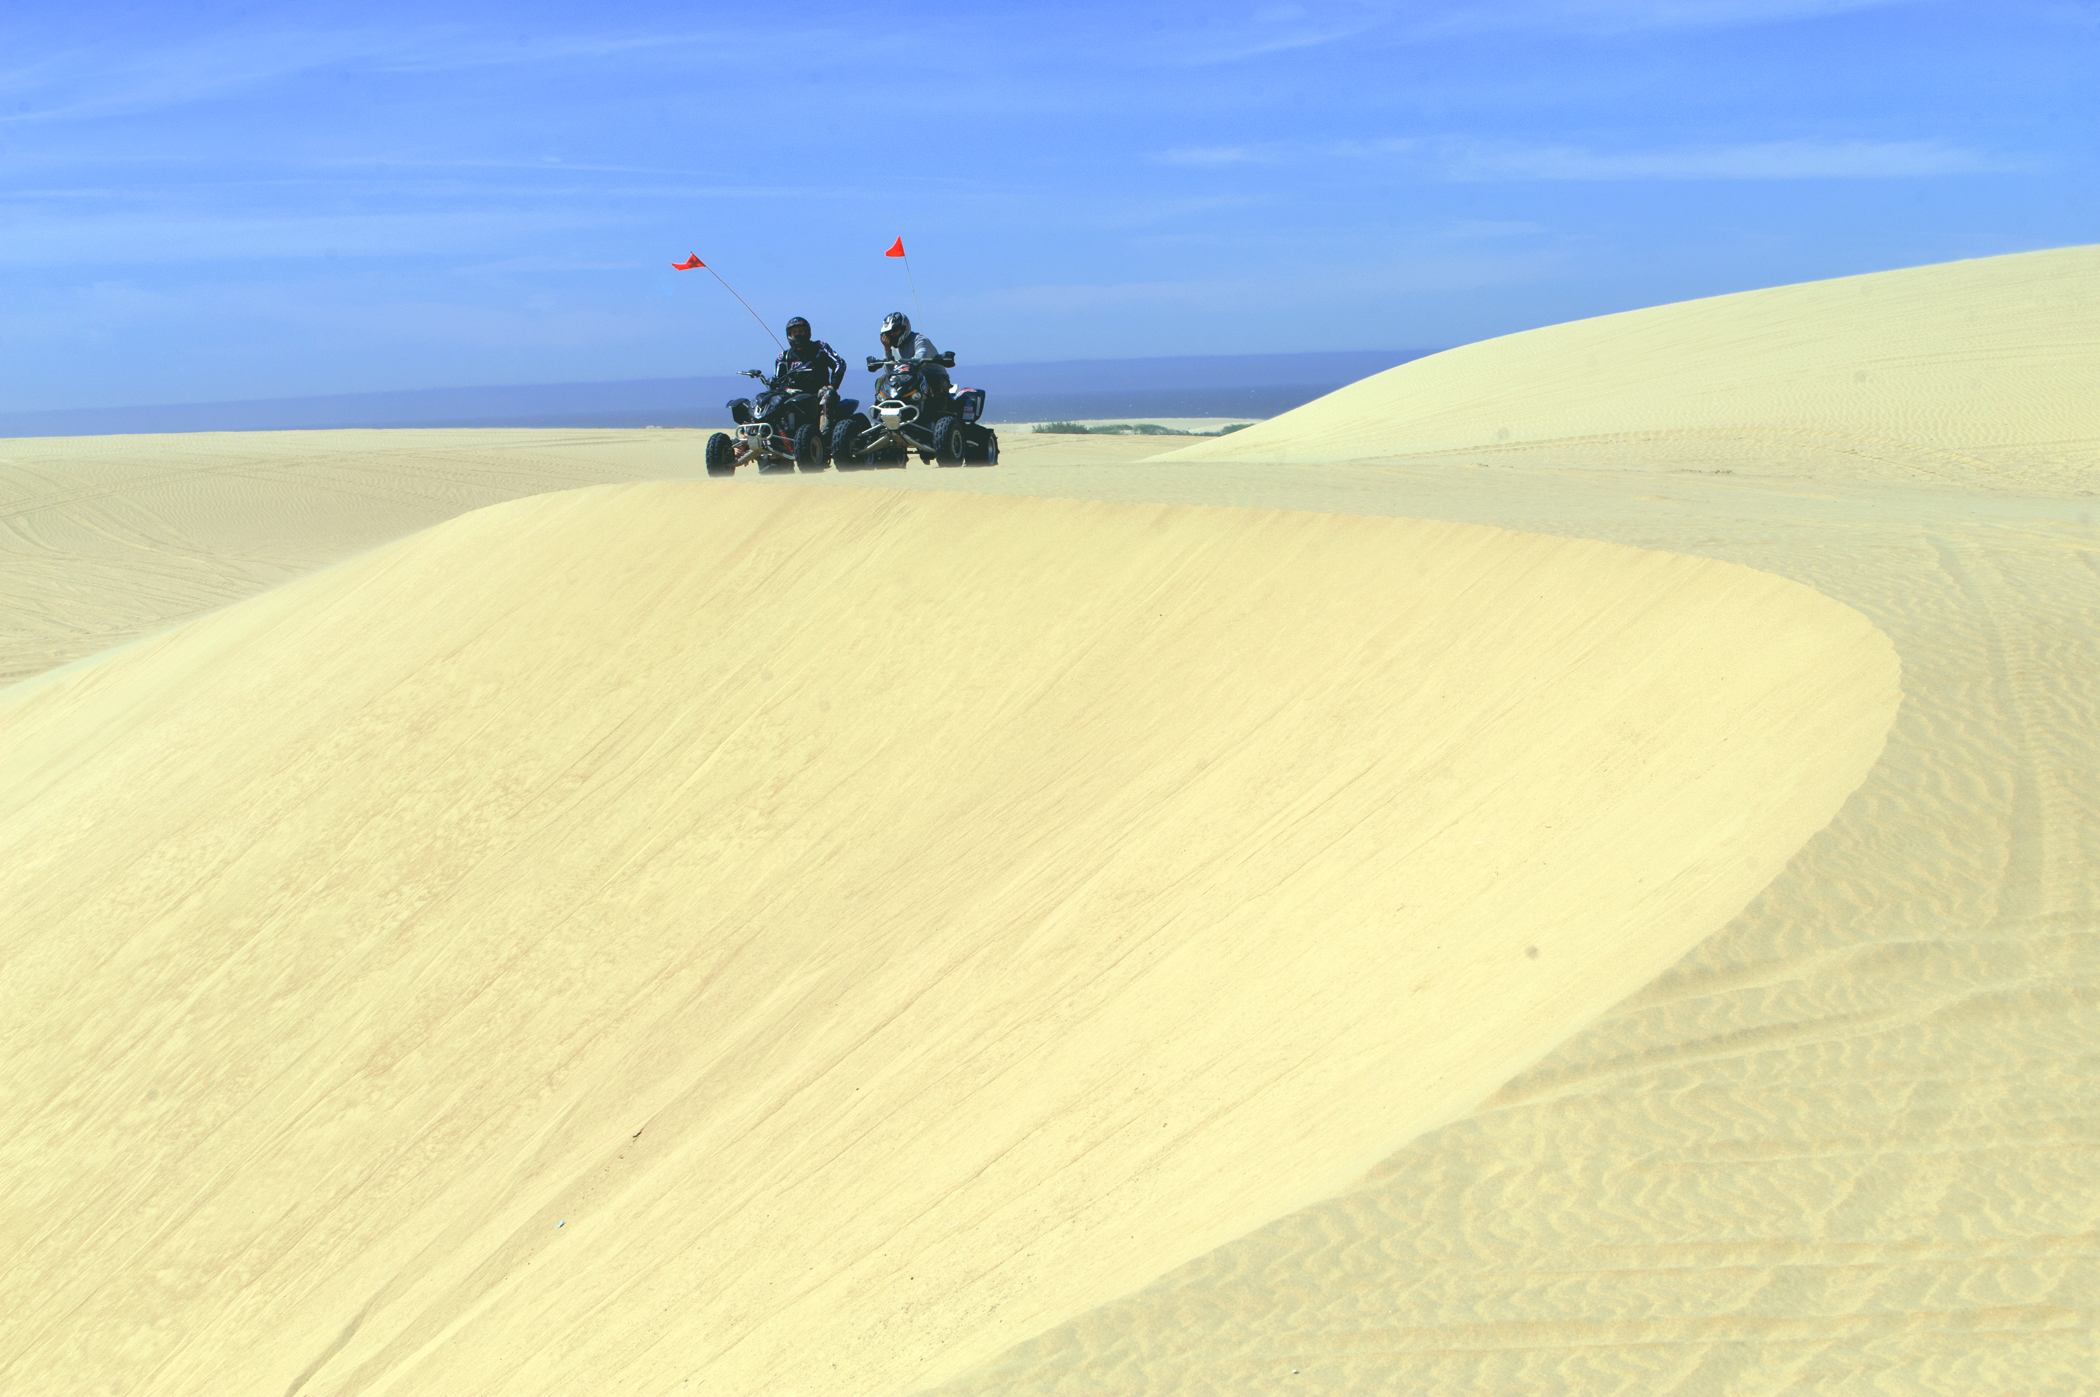 Two ATVs on a Sand Dune